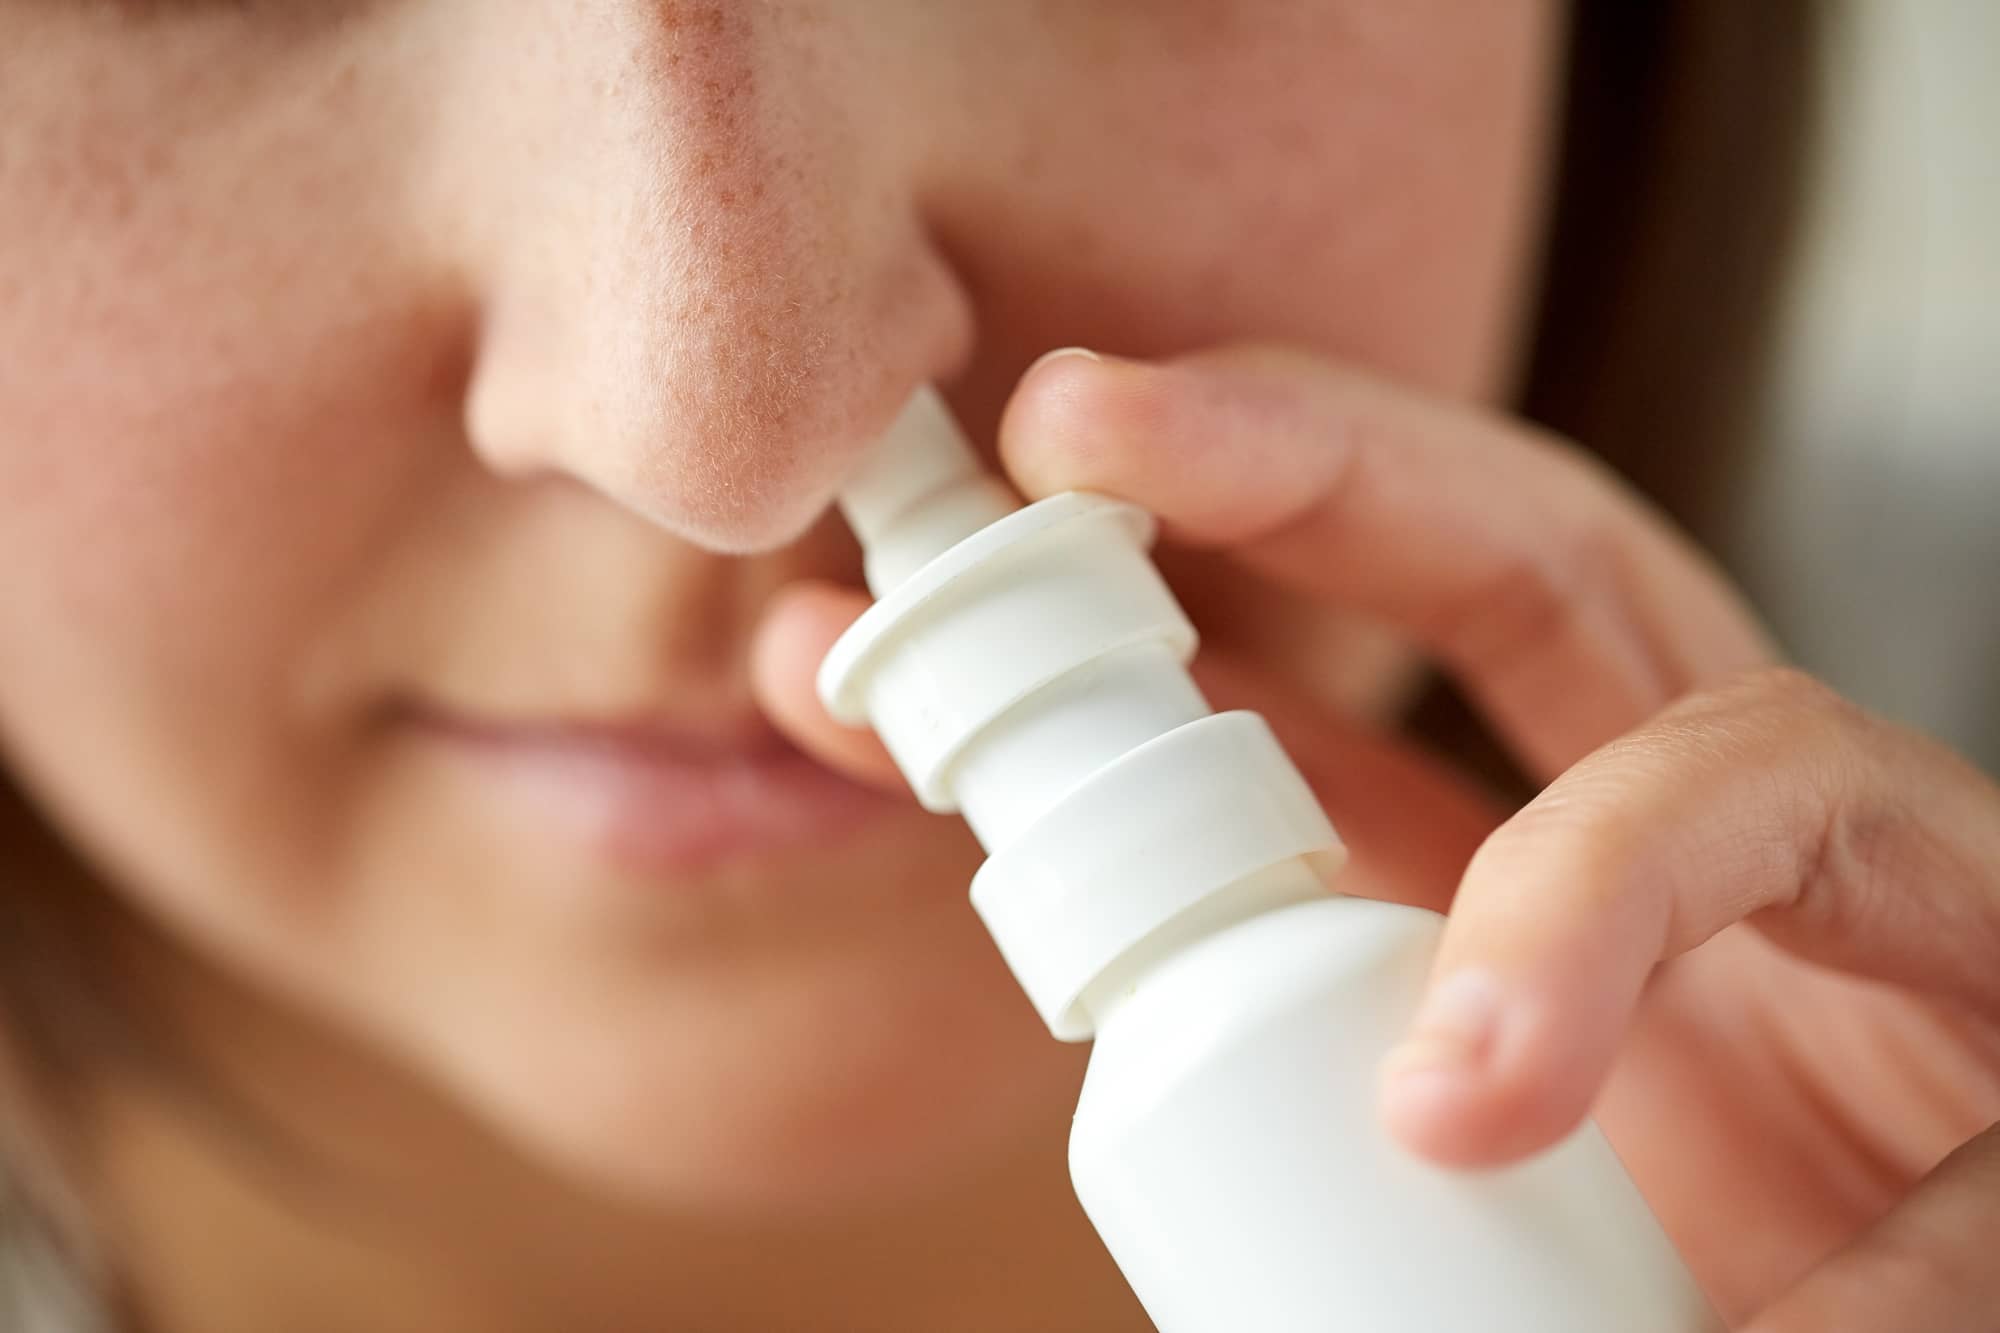 Make your own saline rinse: Combat sinus infections